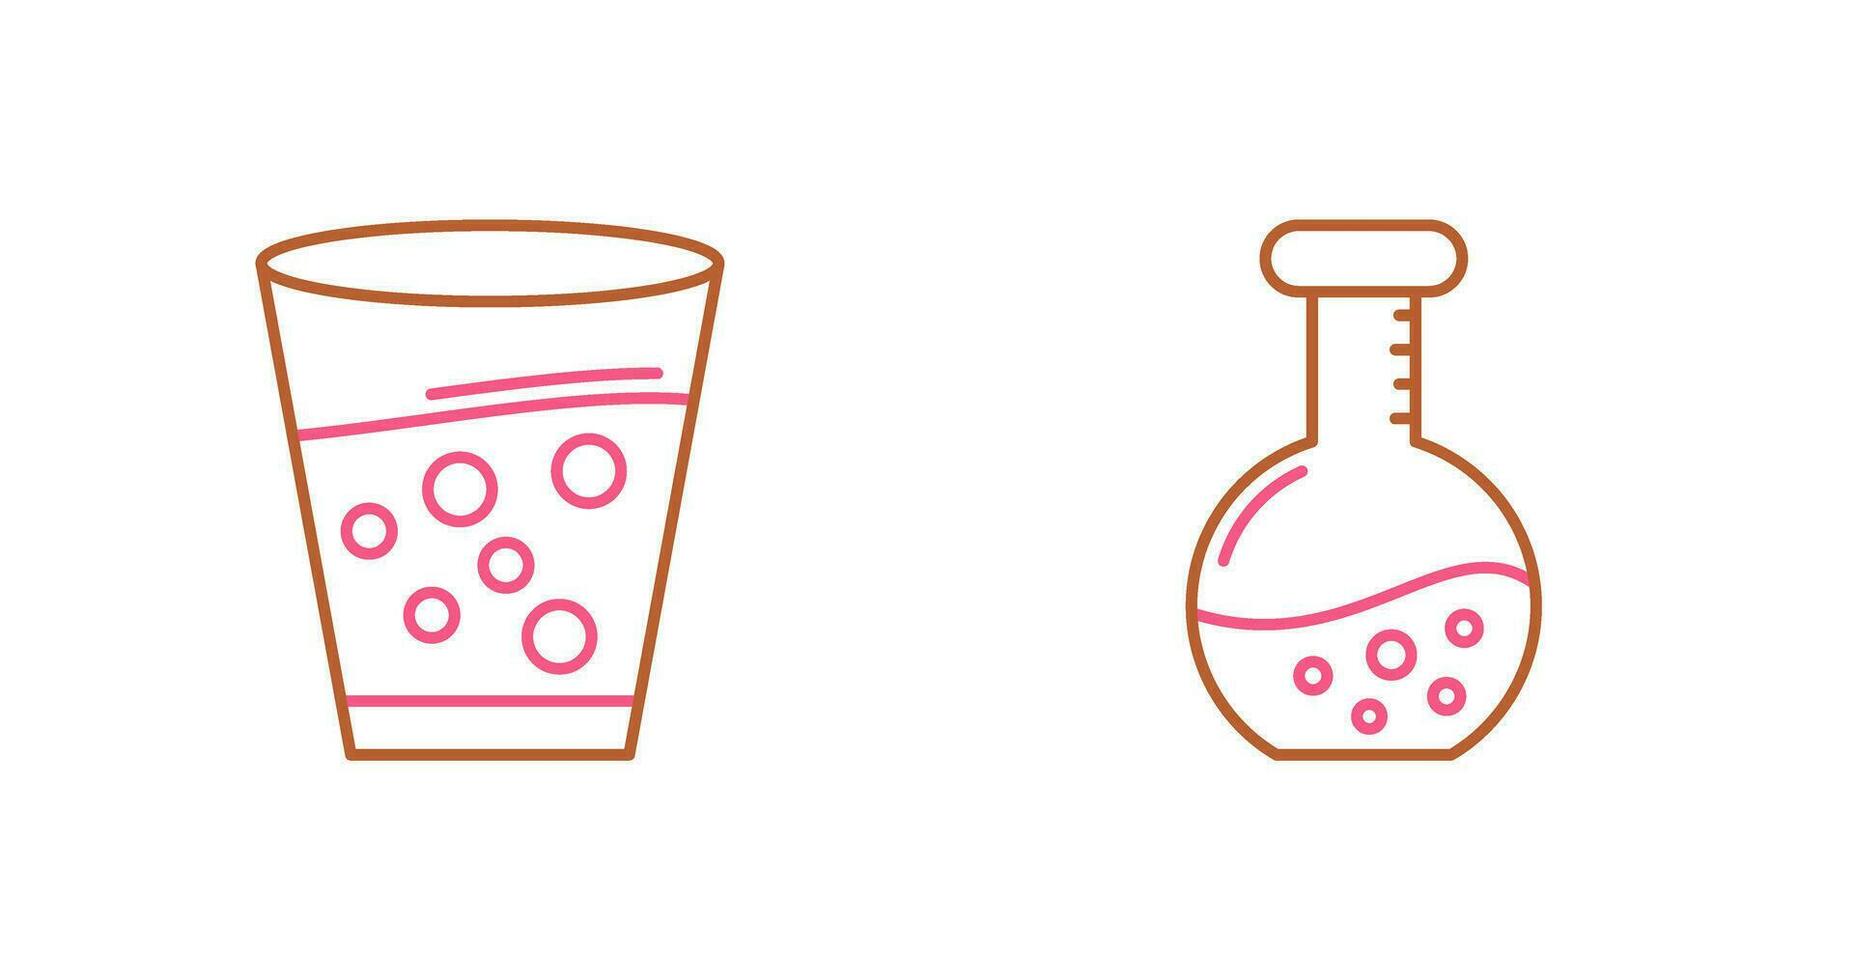 Antacid and Flask Icon vector